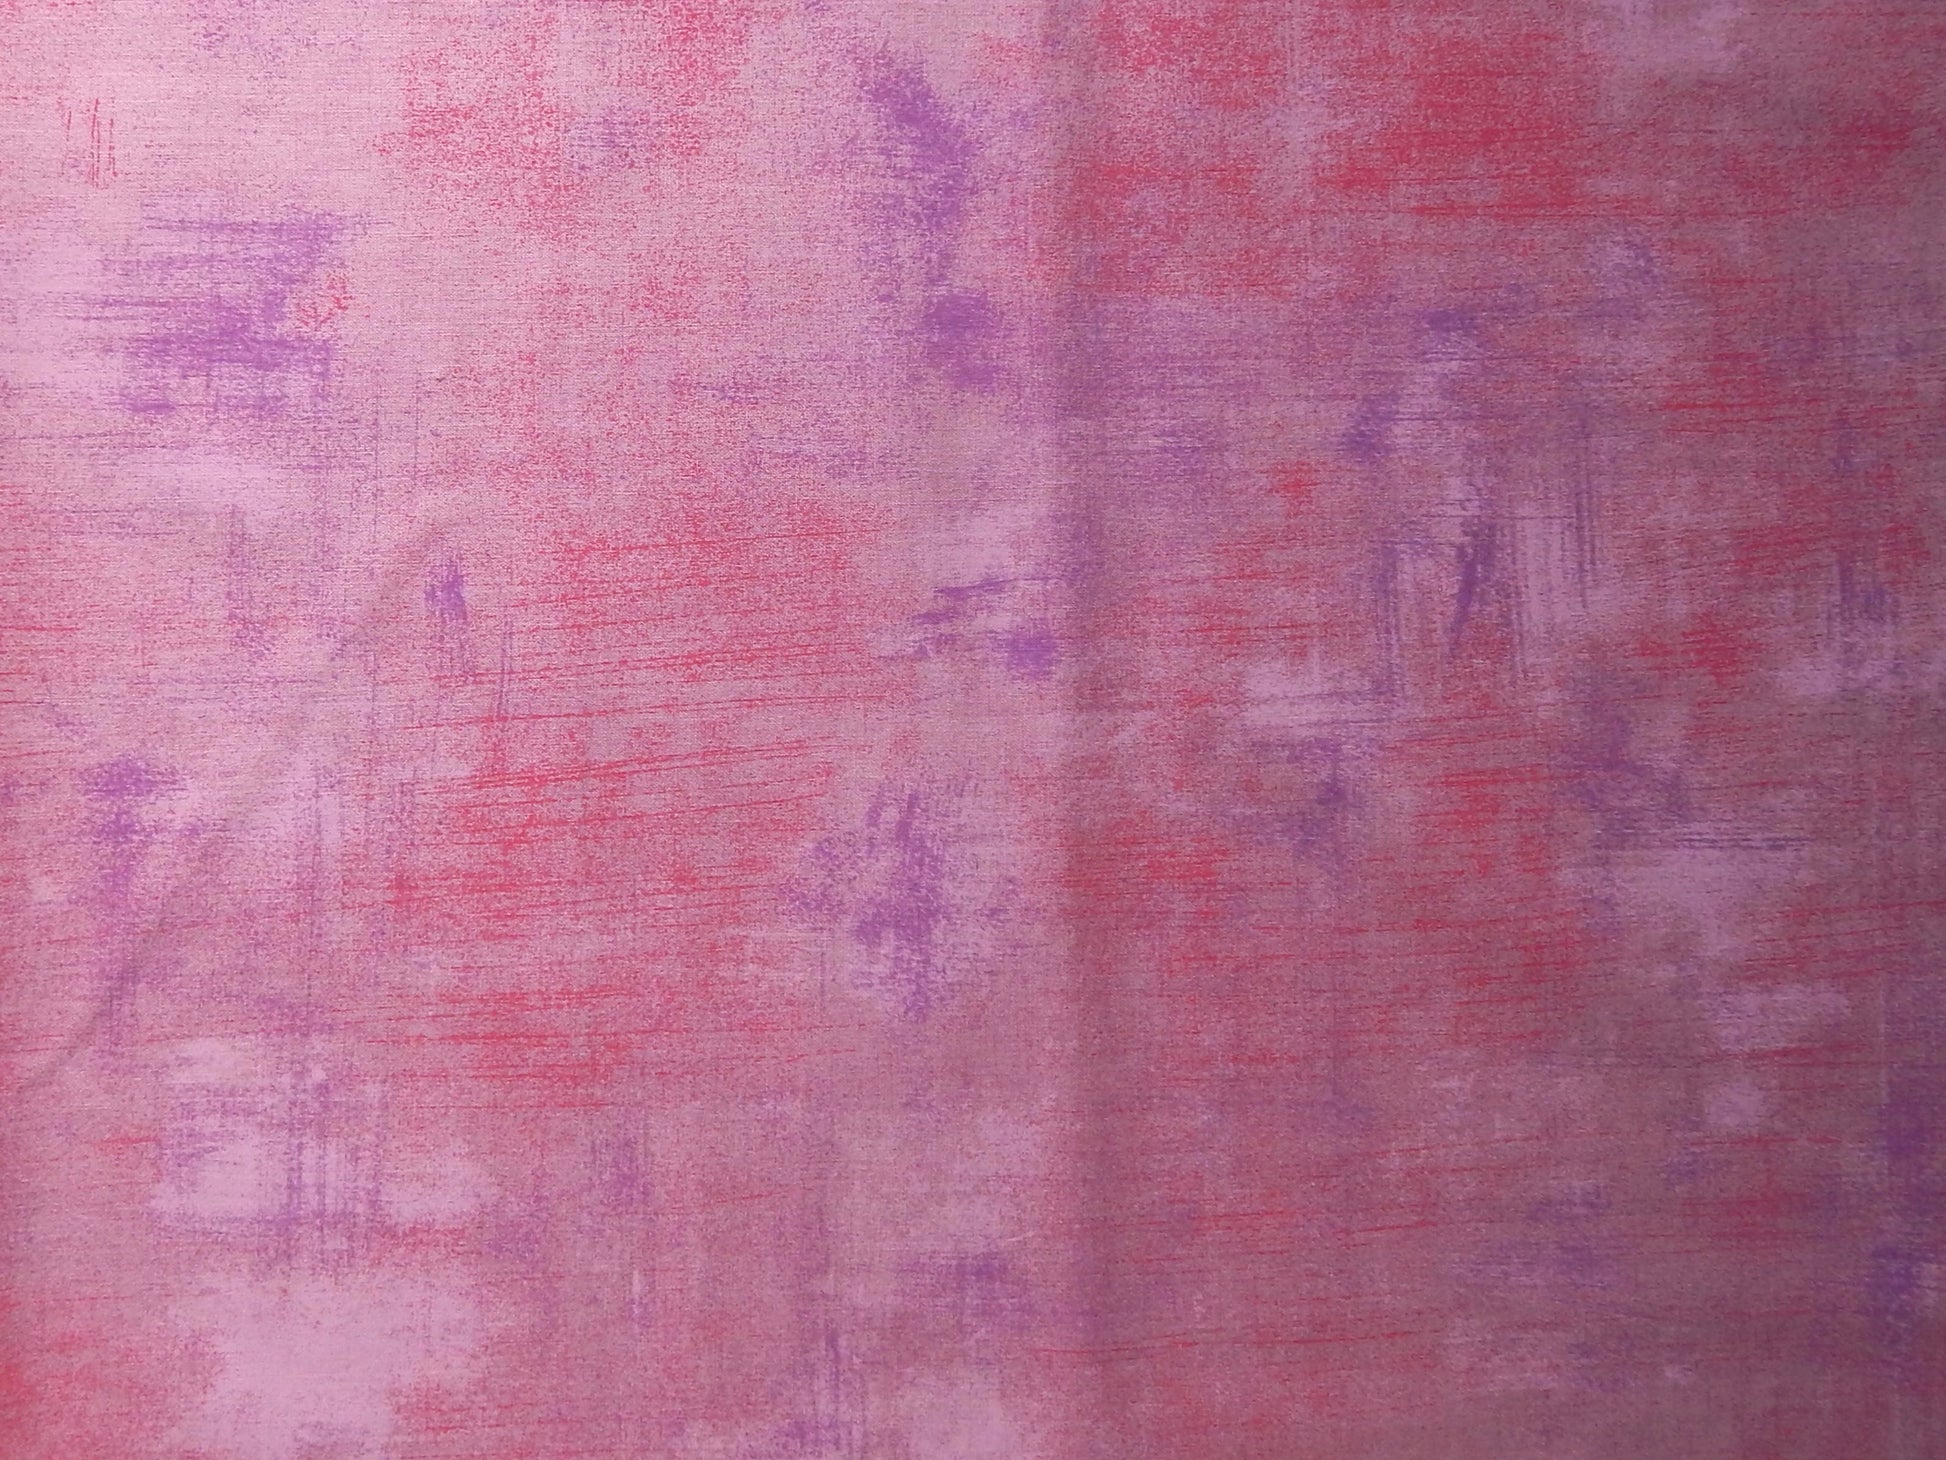 Pink and purple fabric